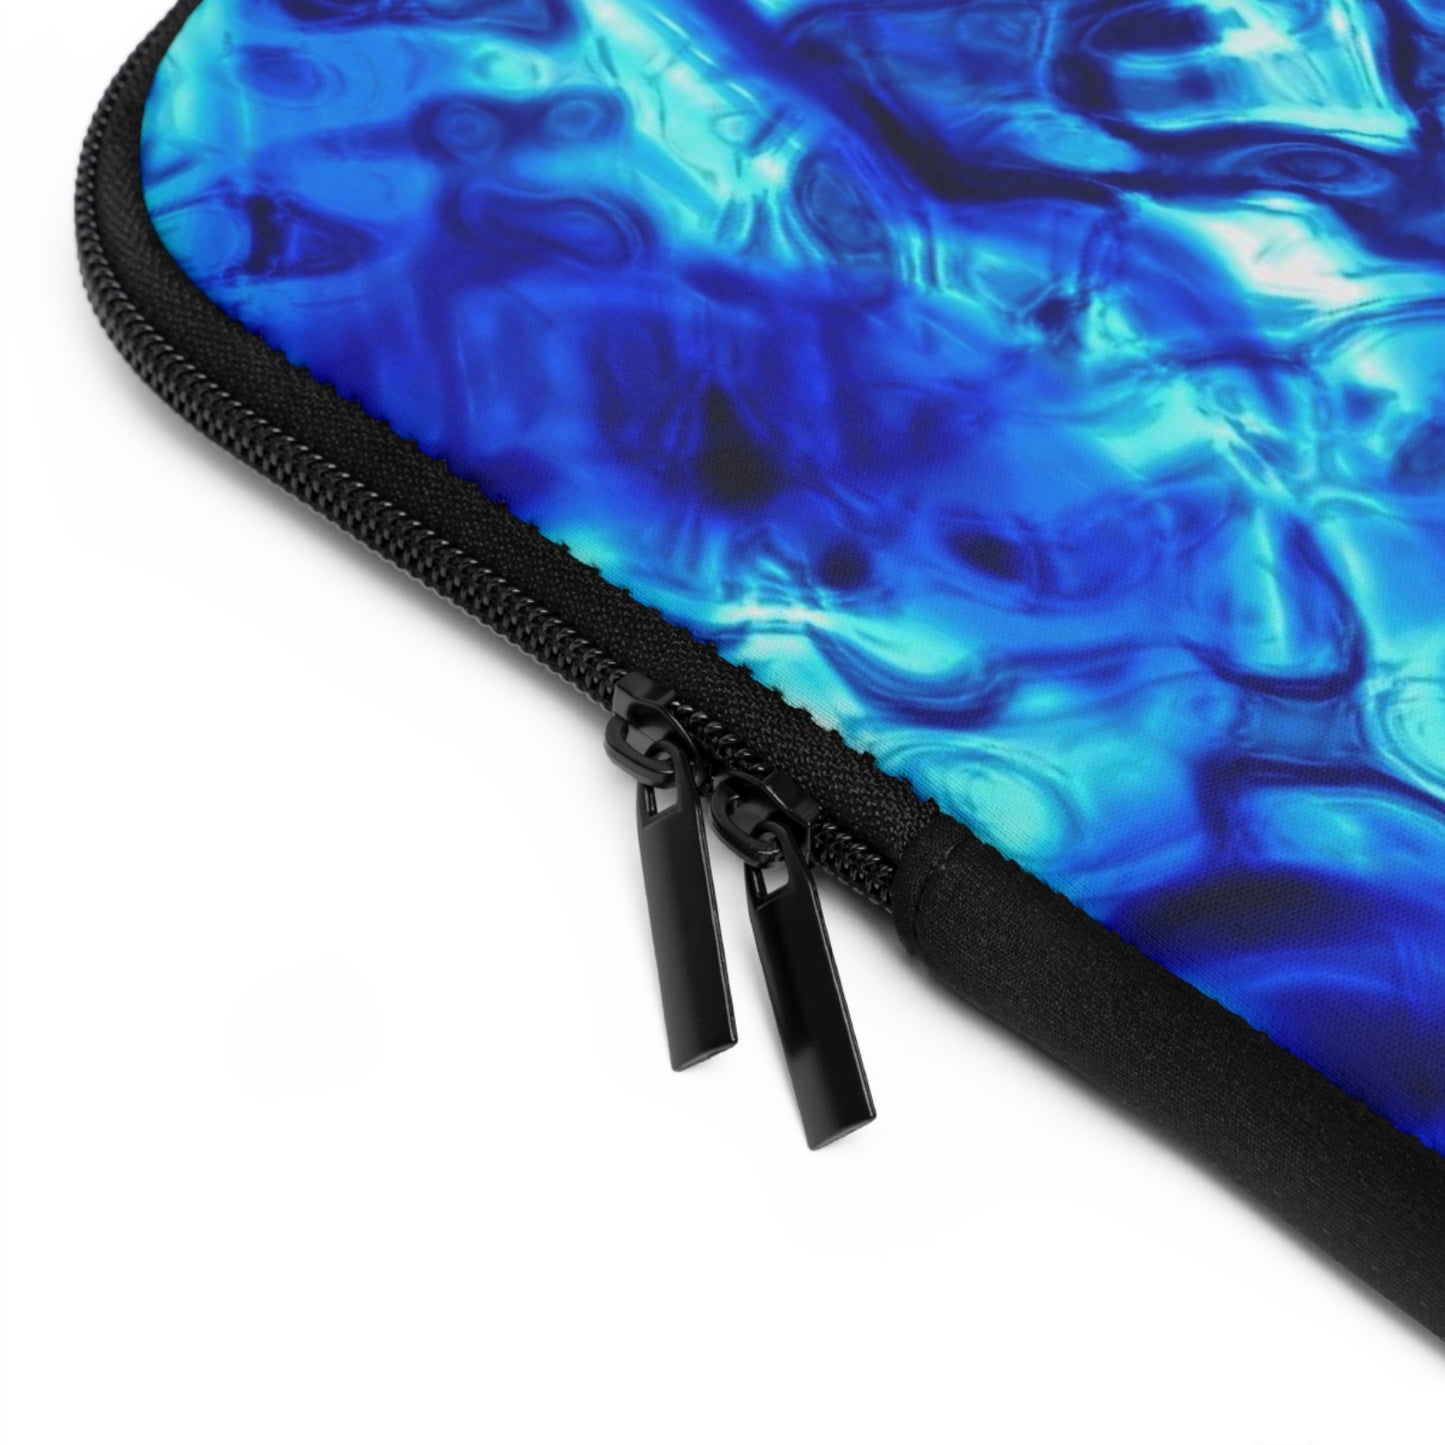 Blue Water Abstract Laptop Sleeve